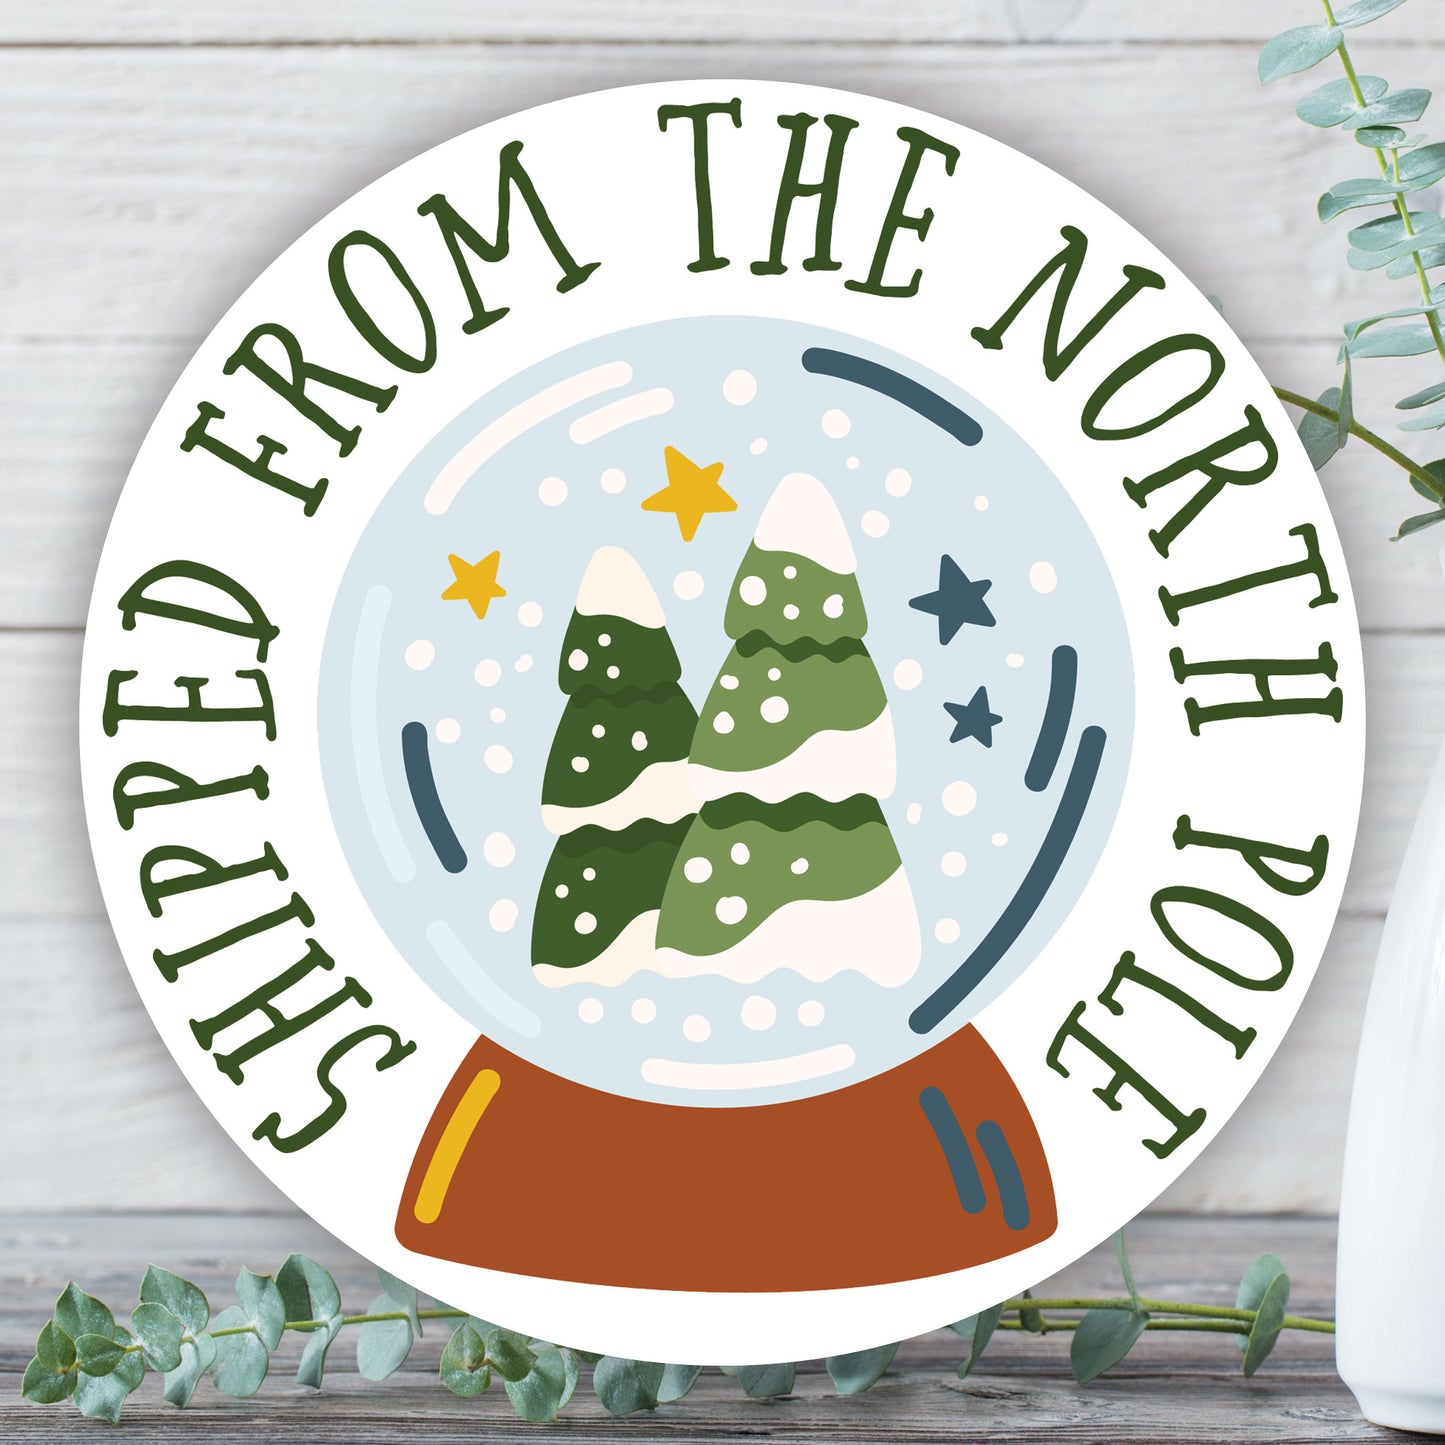 Shipped From The North Pole Sticker